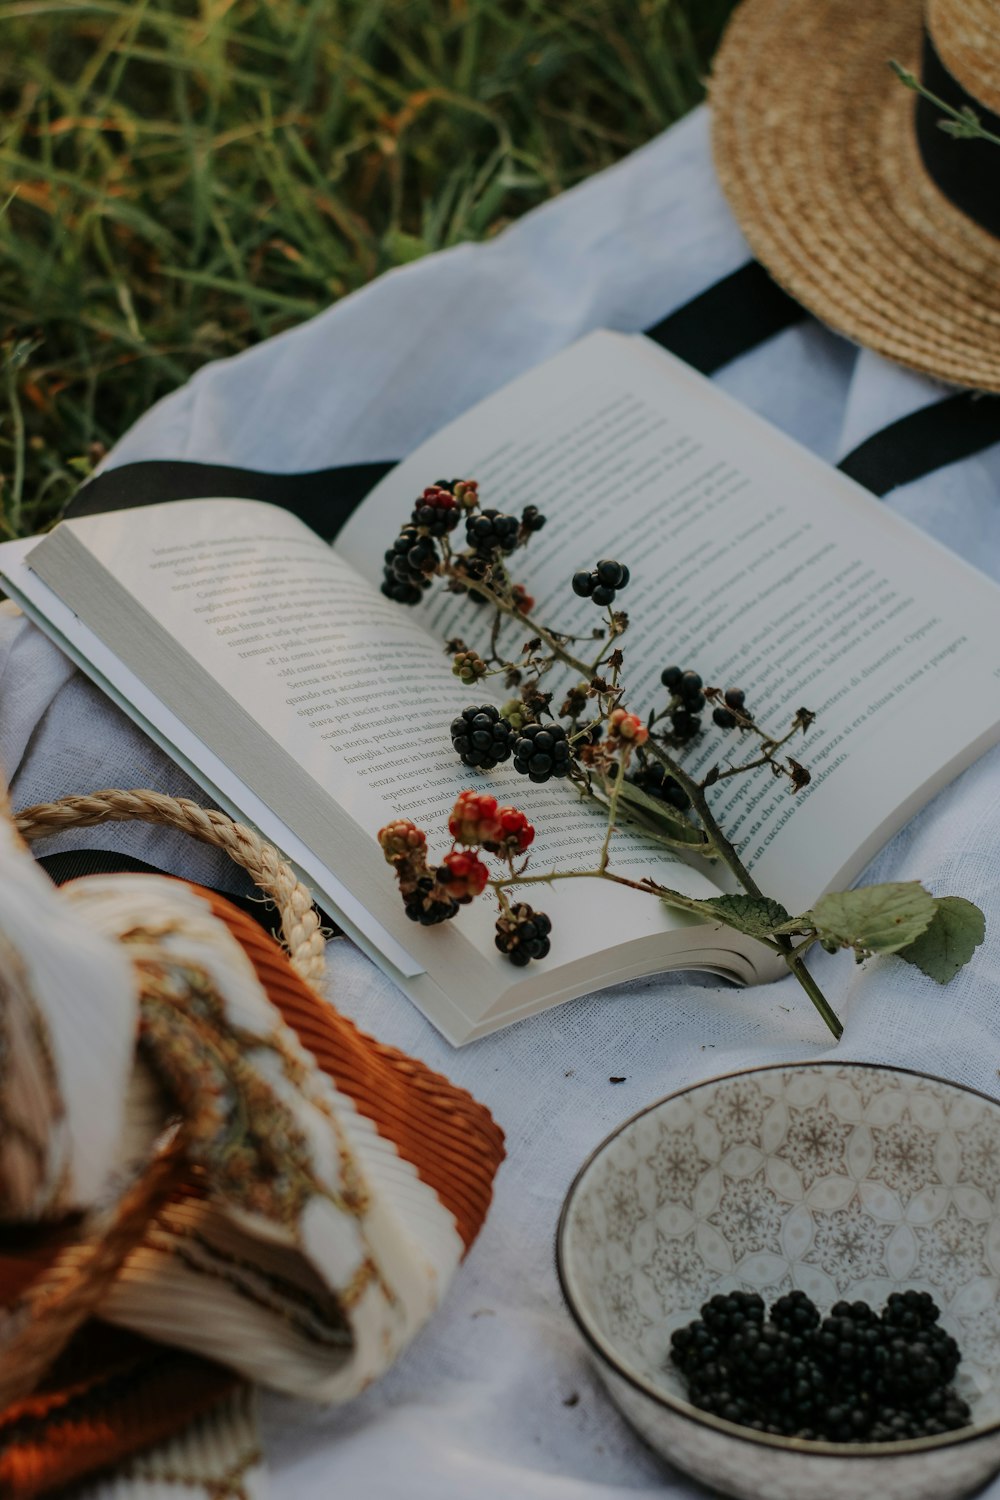 a book, bowl of berries, and straw hat on a blanket